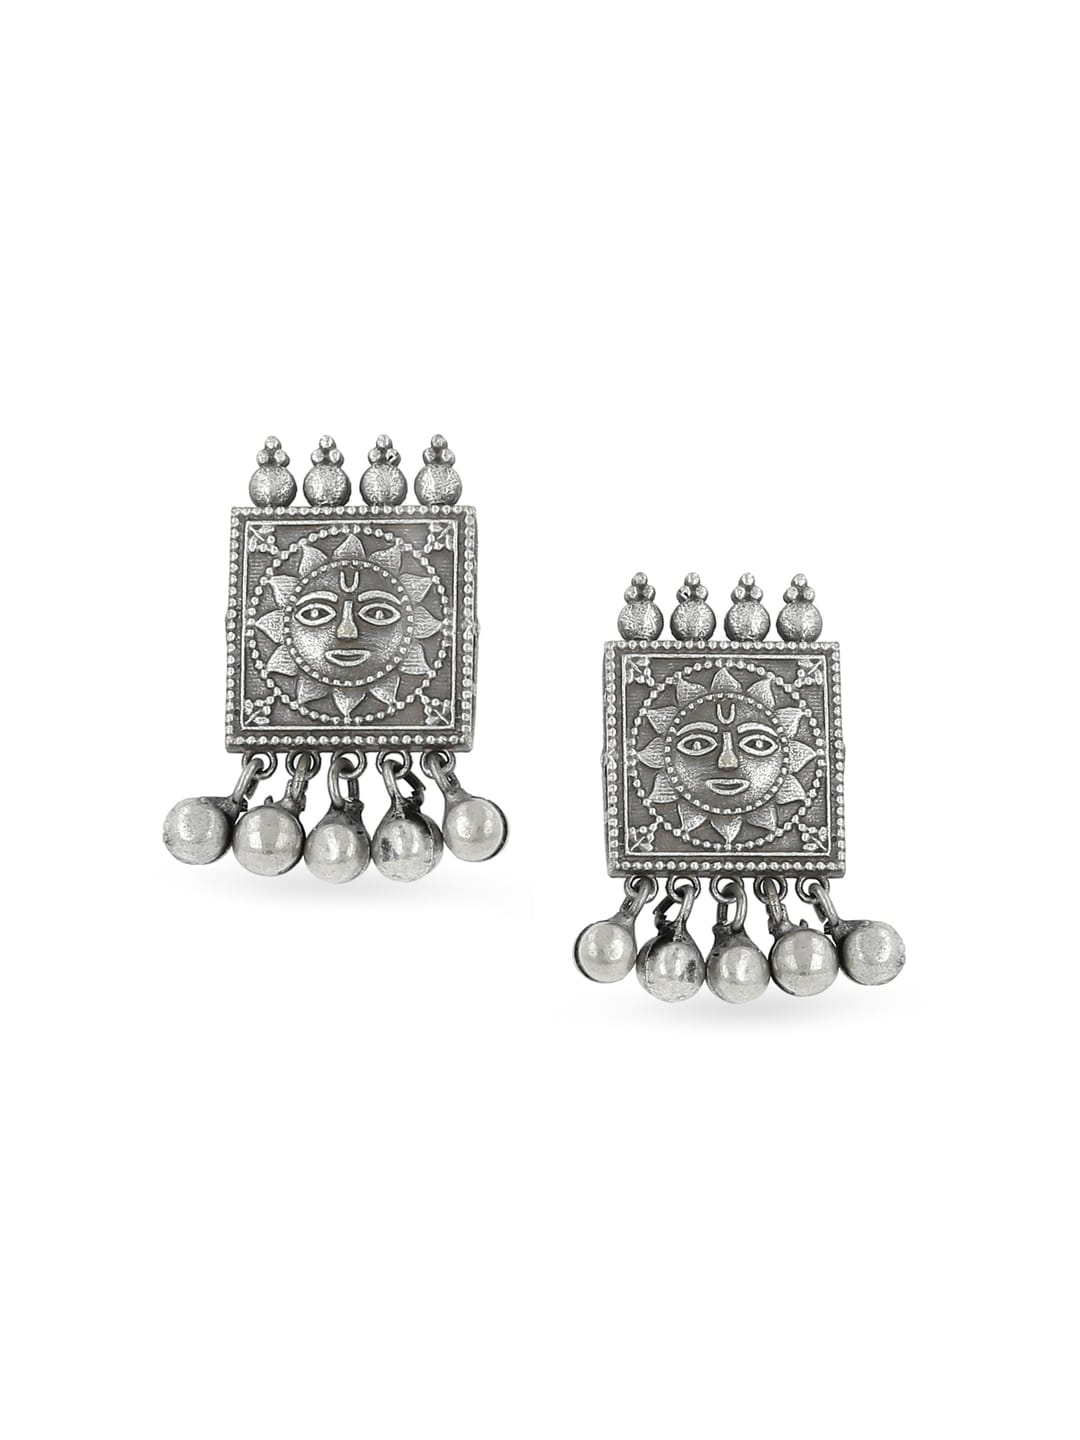 EL REGALO Silver-Toned Square Oxidise Studs Earrings - for Women and Girls
Style ID: 17119258